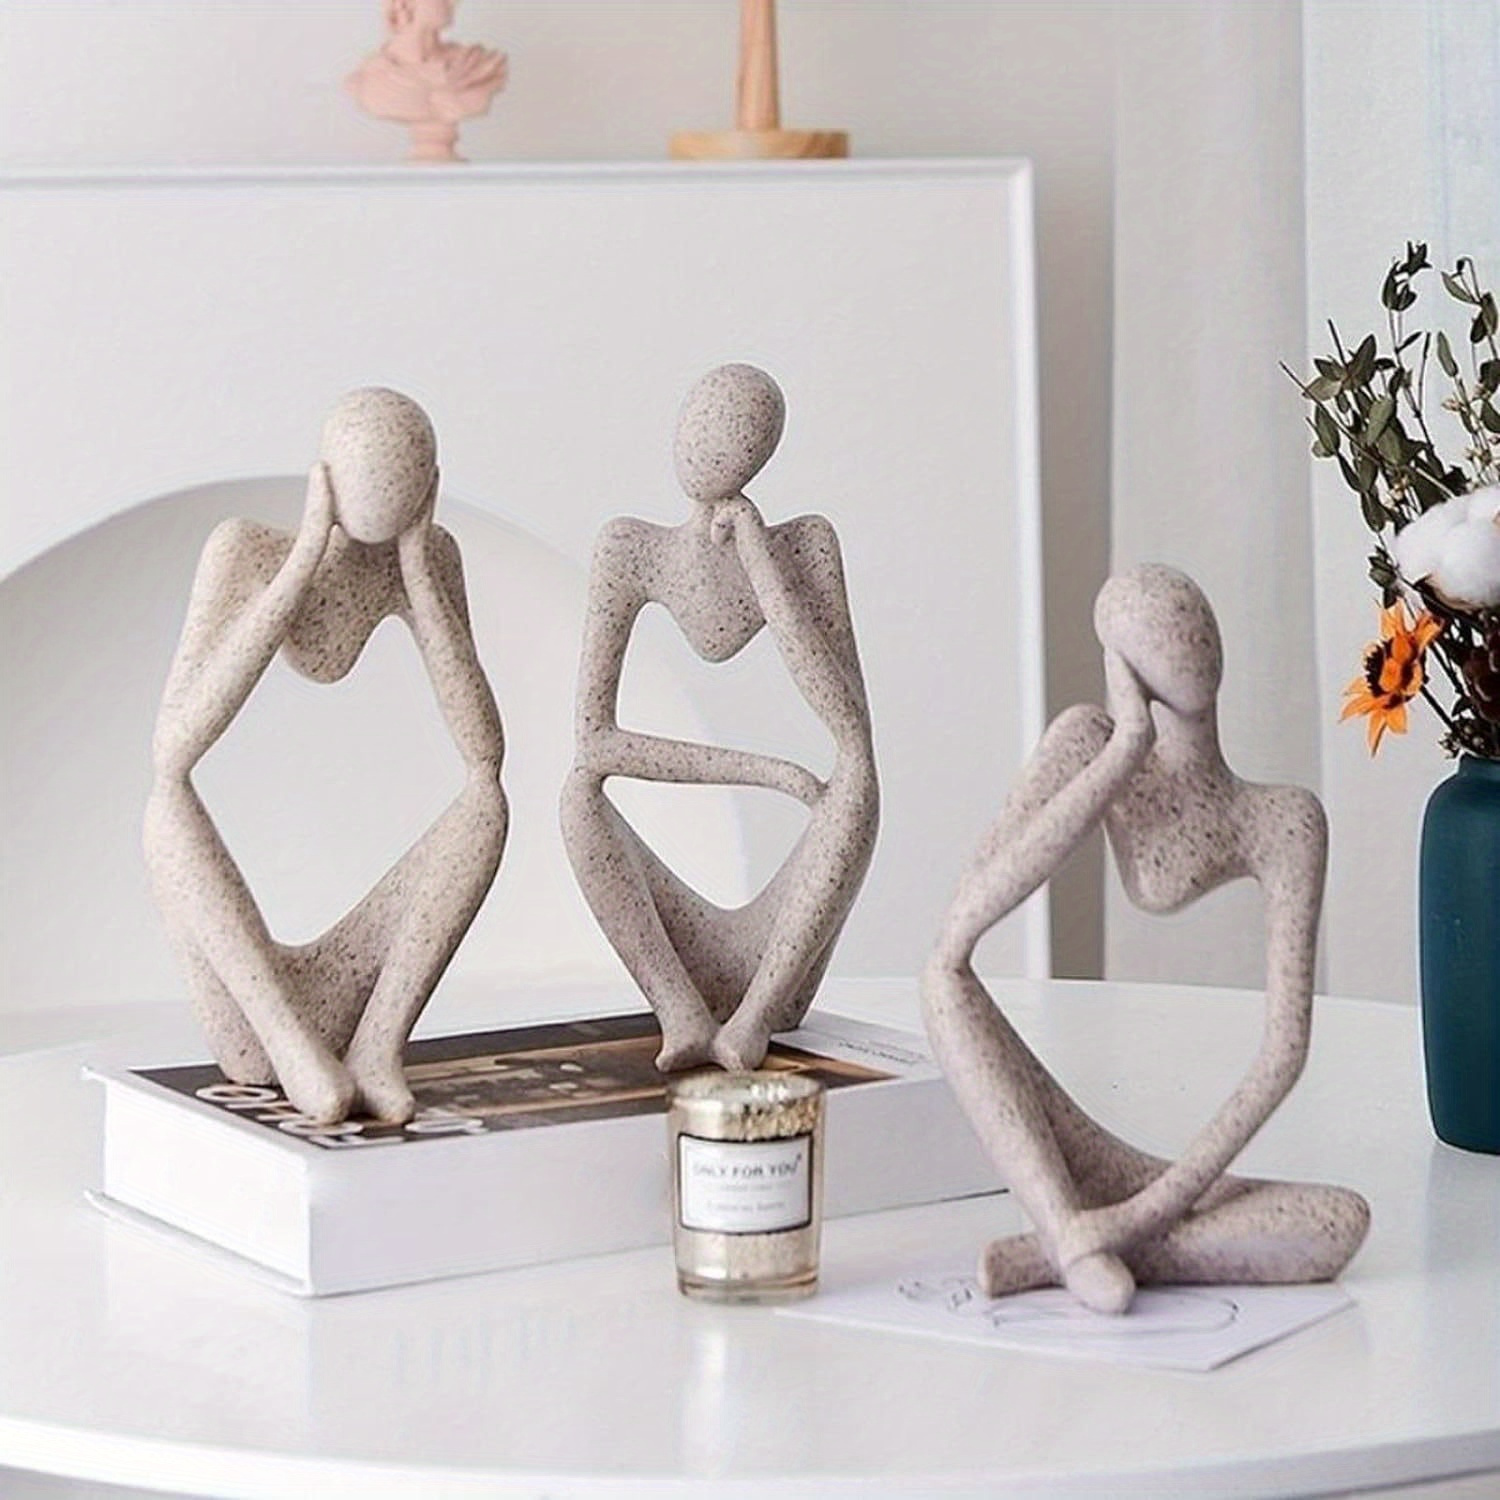 

Thinker Statue Set - 3 Pcs Personalized Abstract Resin Ornaments For Office, Living Room, Desk Decor, Art & Crafts